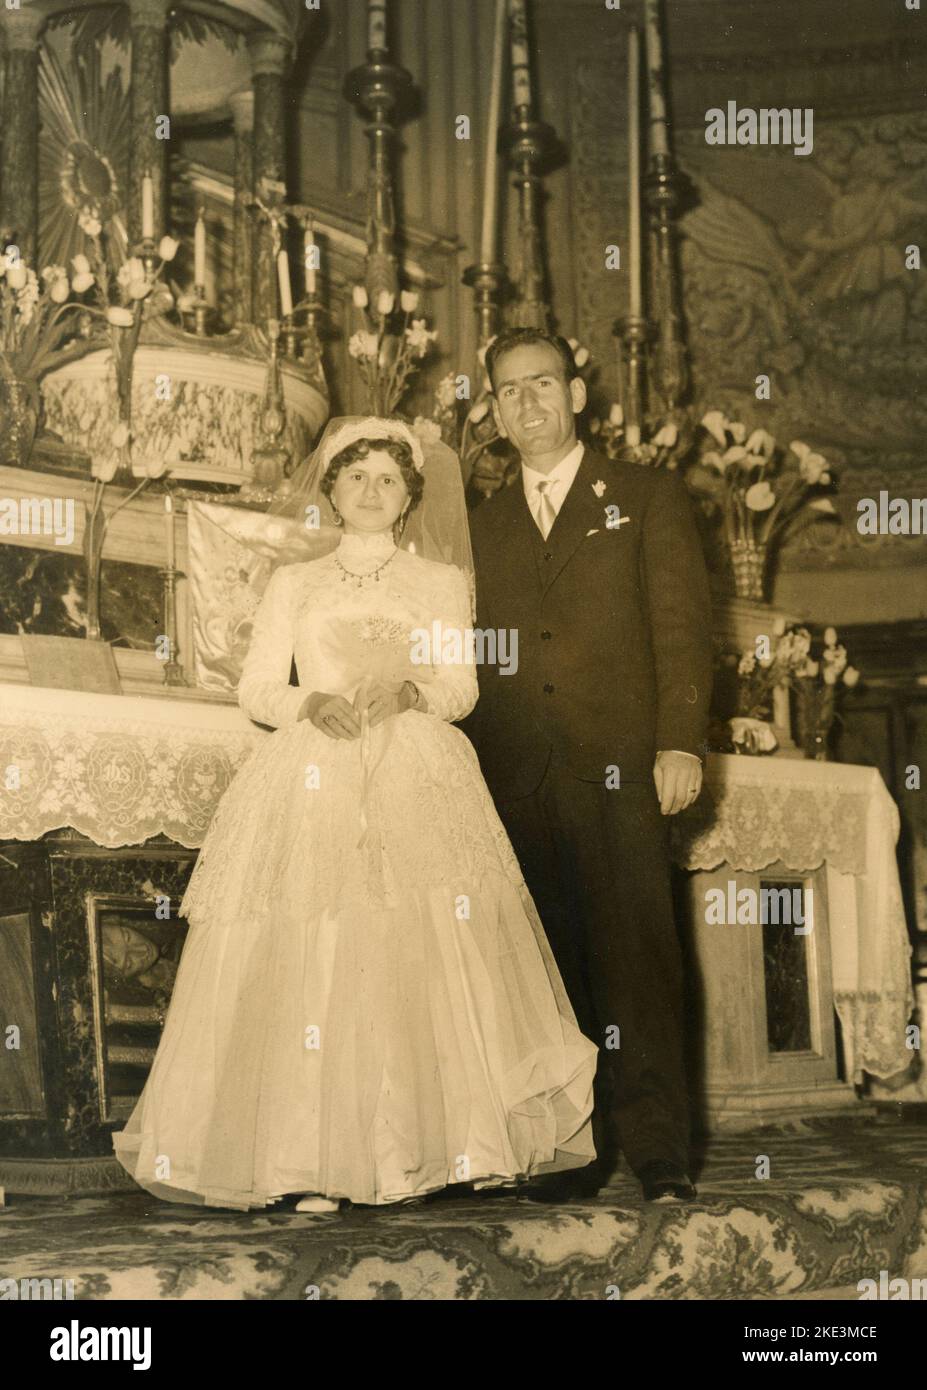 Wedding in a village in central Italy: The Bride and the Groom in the church next to the altar, 1950s Stock Photo